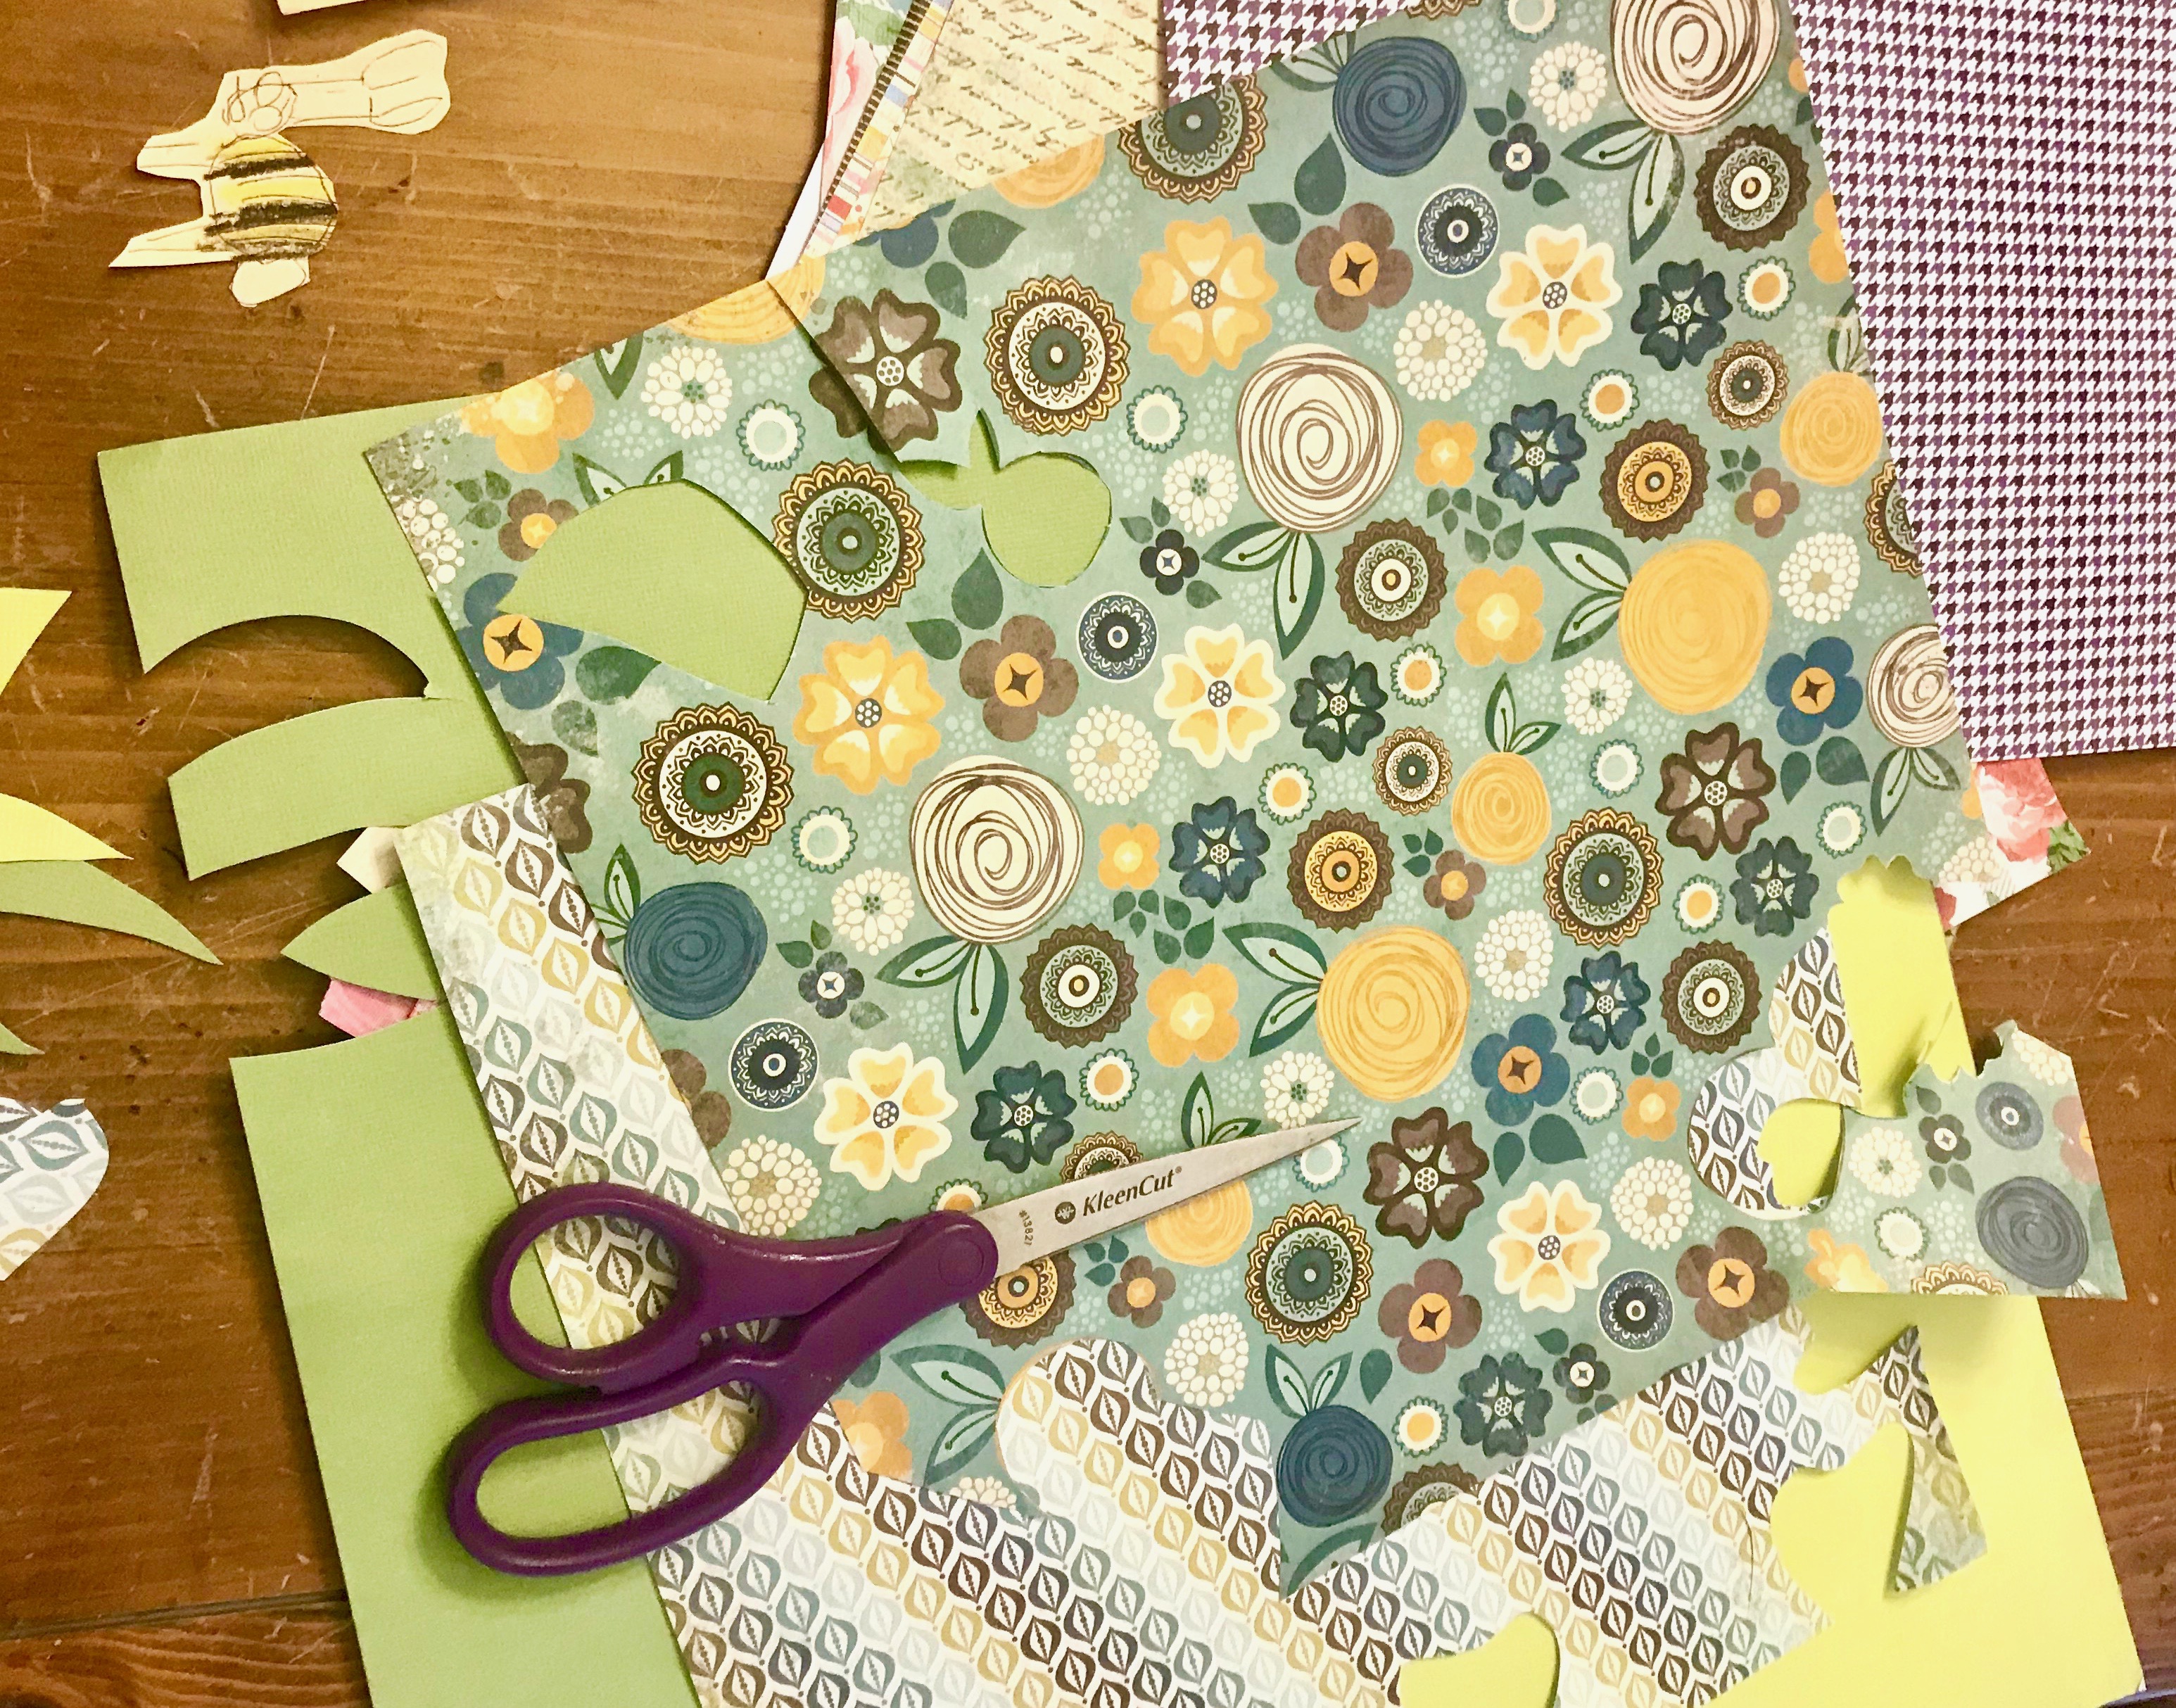 scissors on top of patterned scrapbook papers